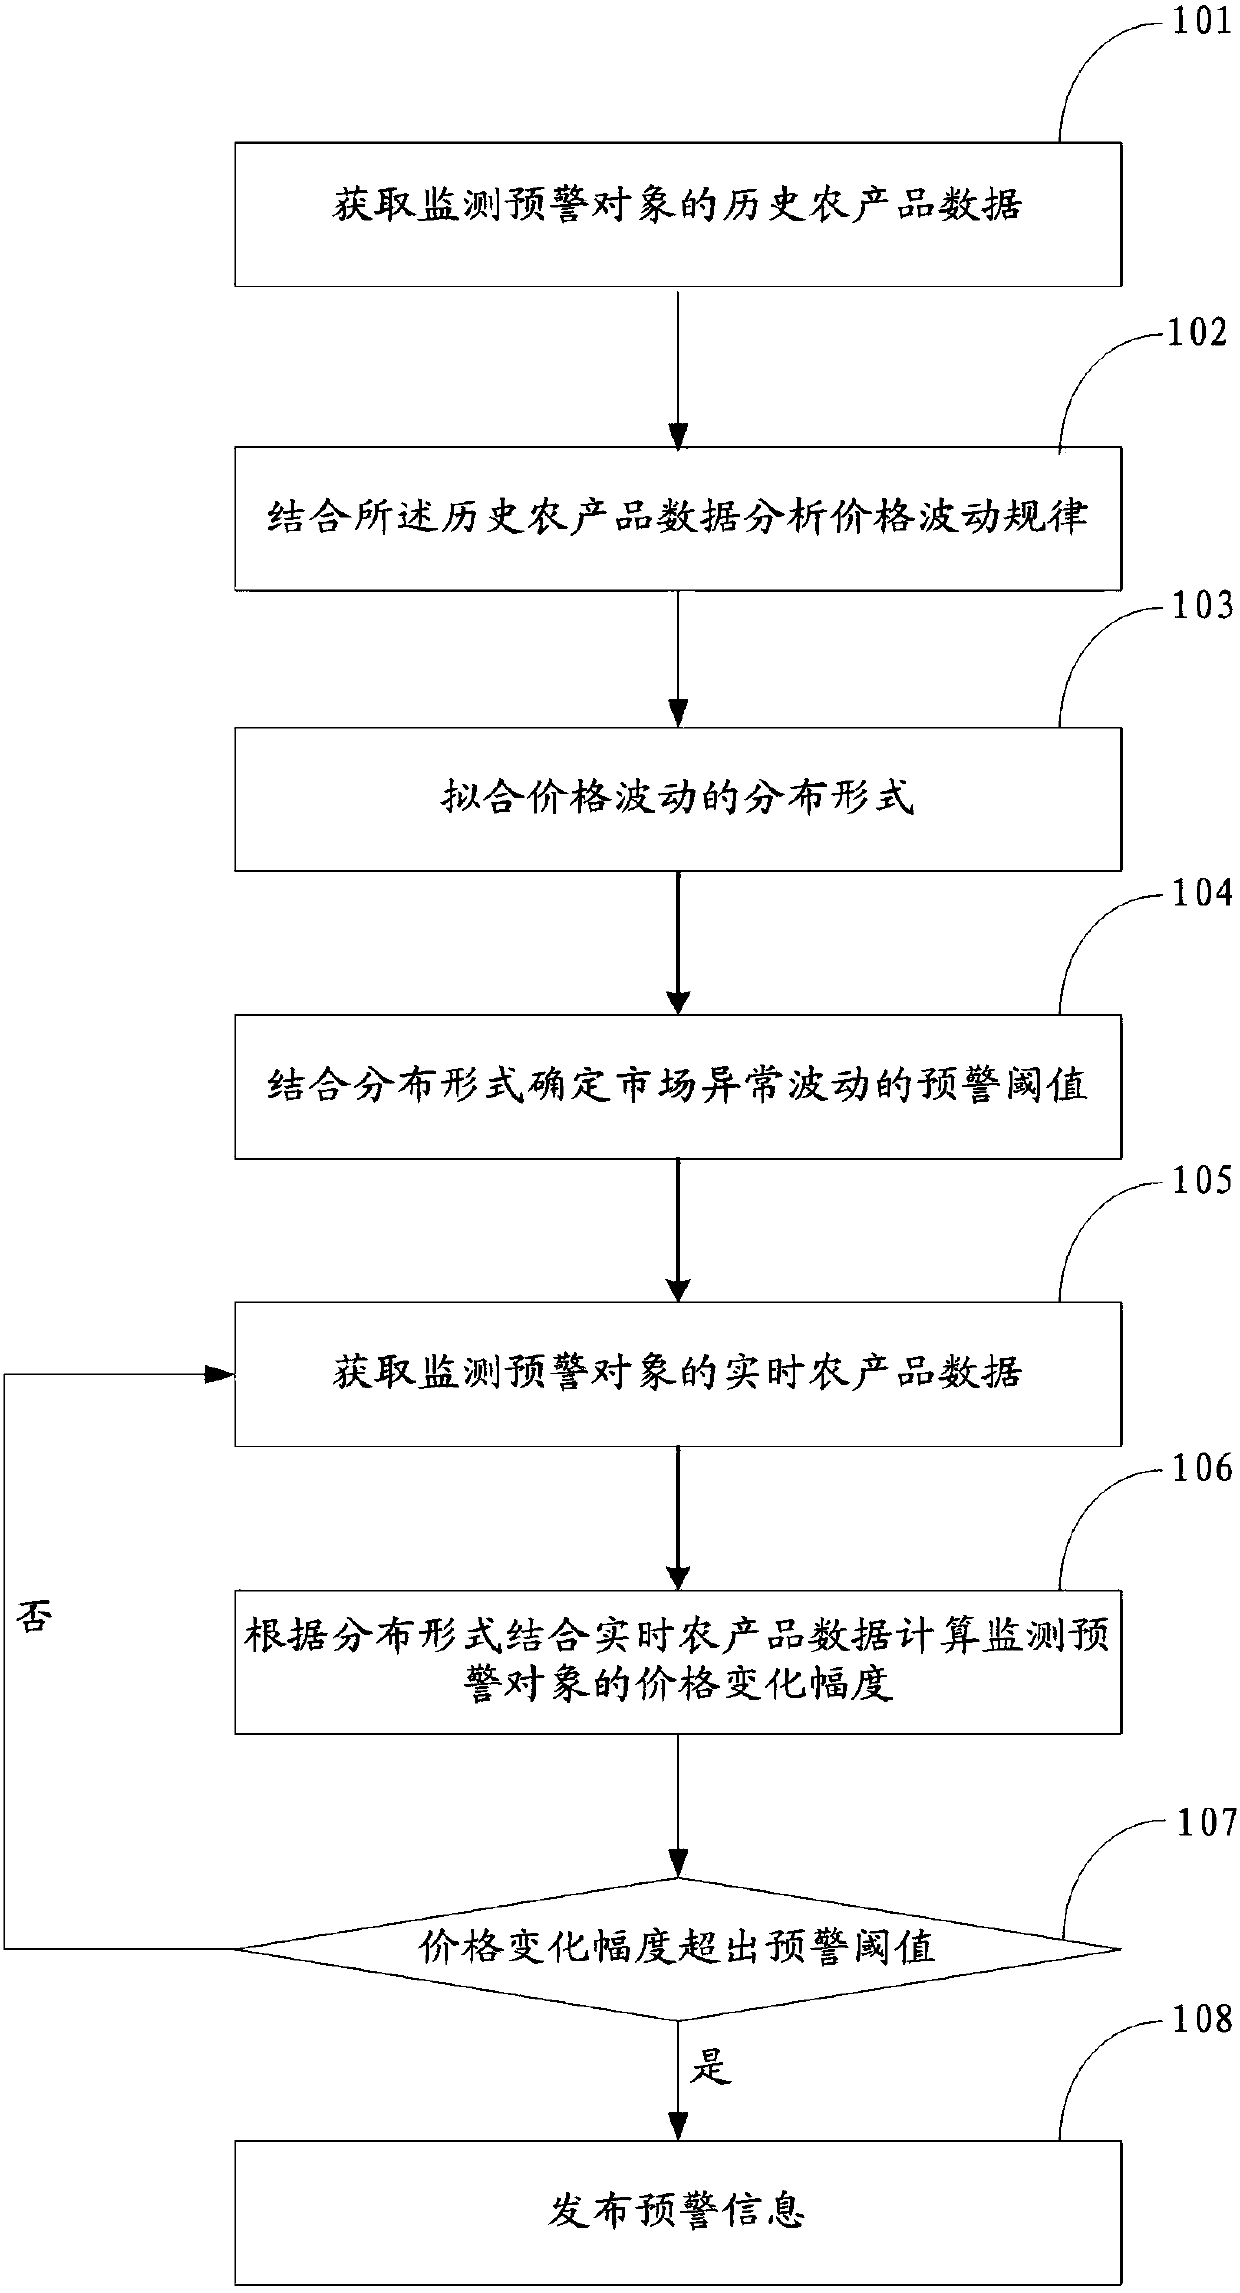 Method and system for monitoring abnormal fluctuation risk of agricultural product market